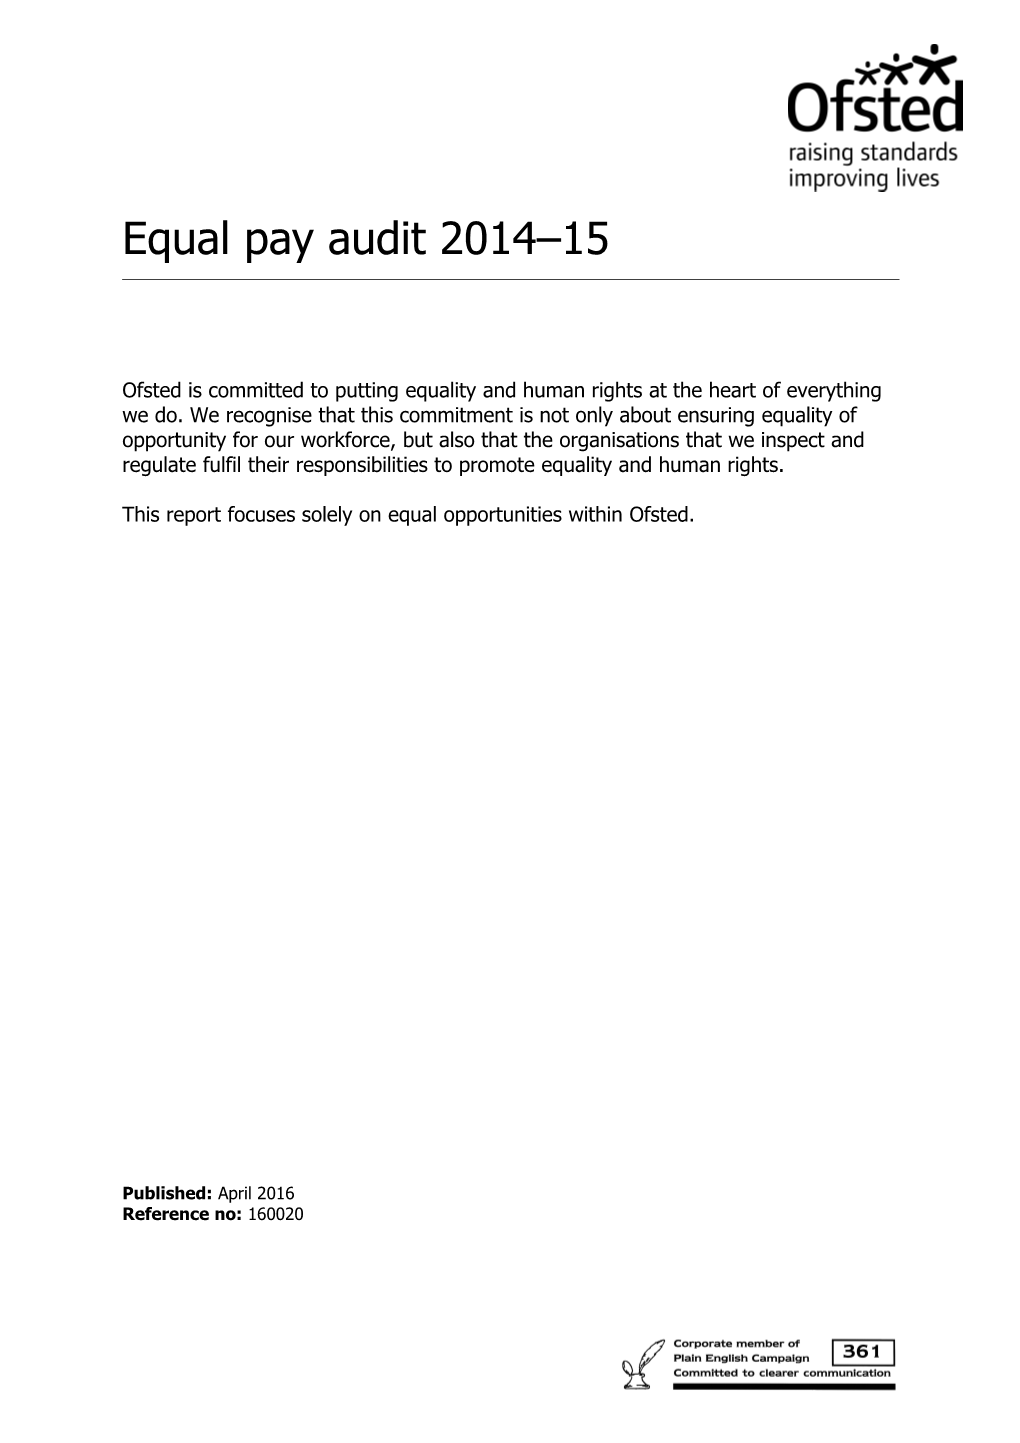 Ofsted S Aims for Equality and Diversity in Employment